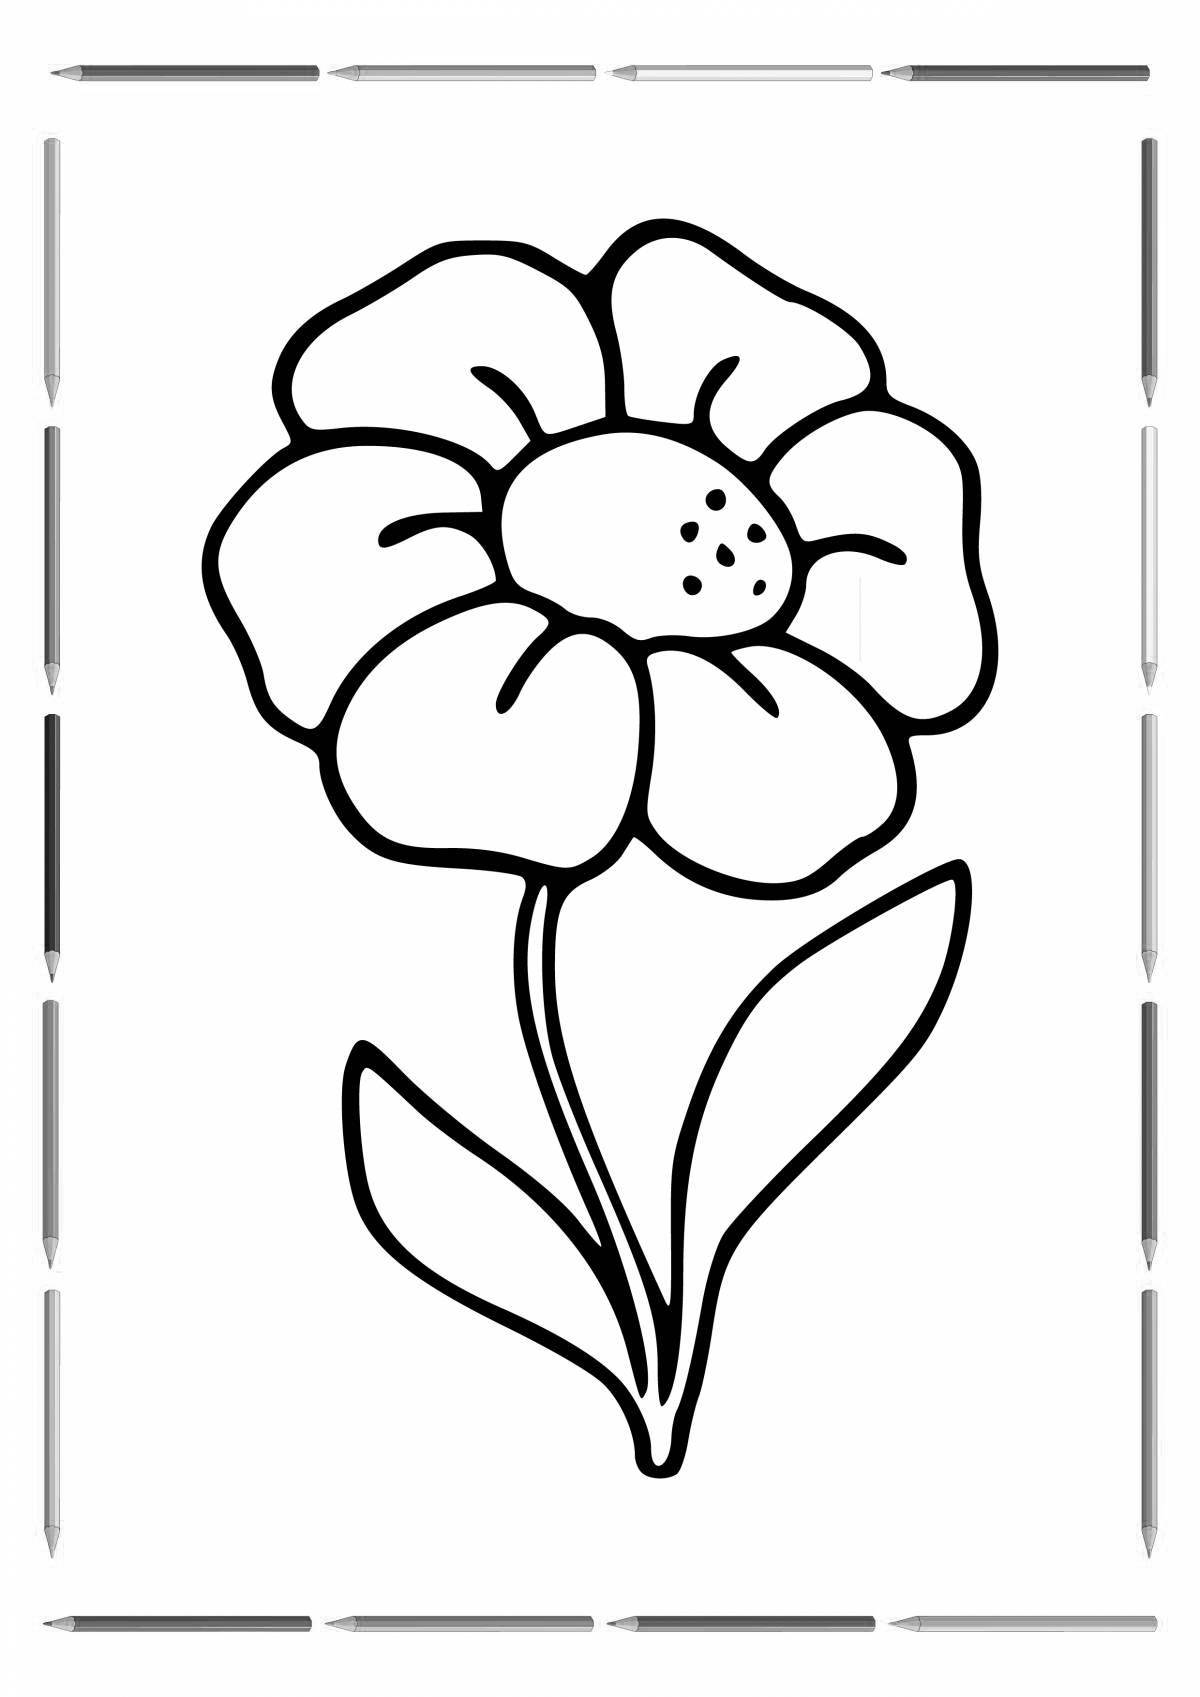 Ecstatic simple flower coloring page